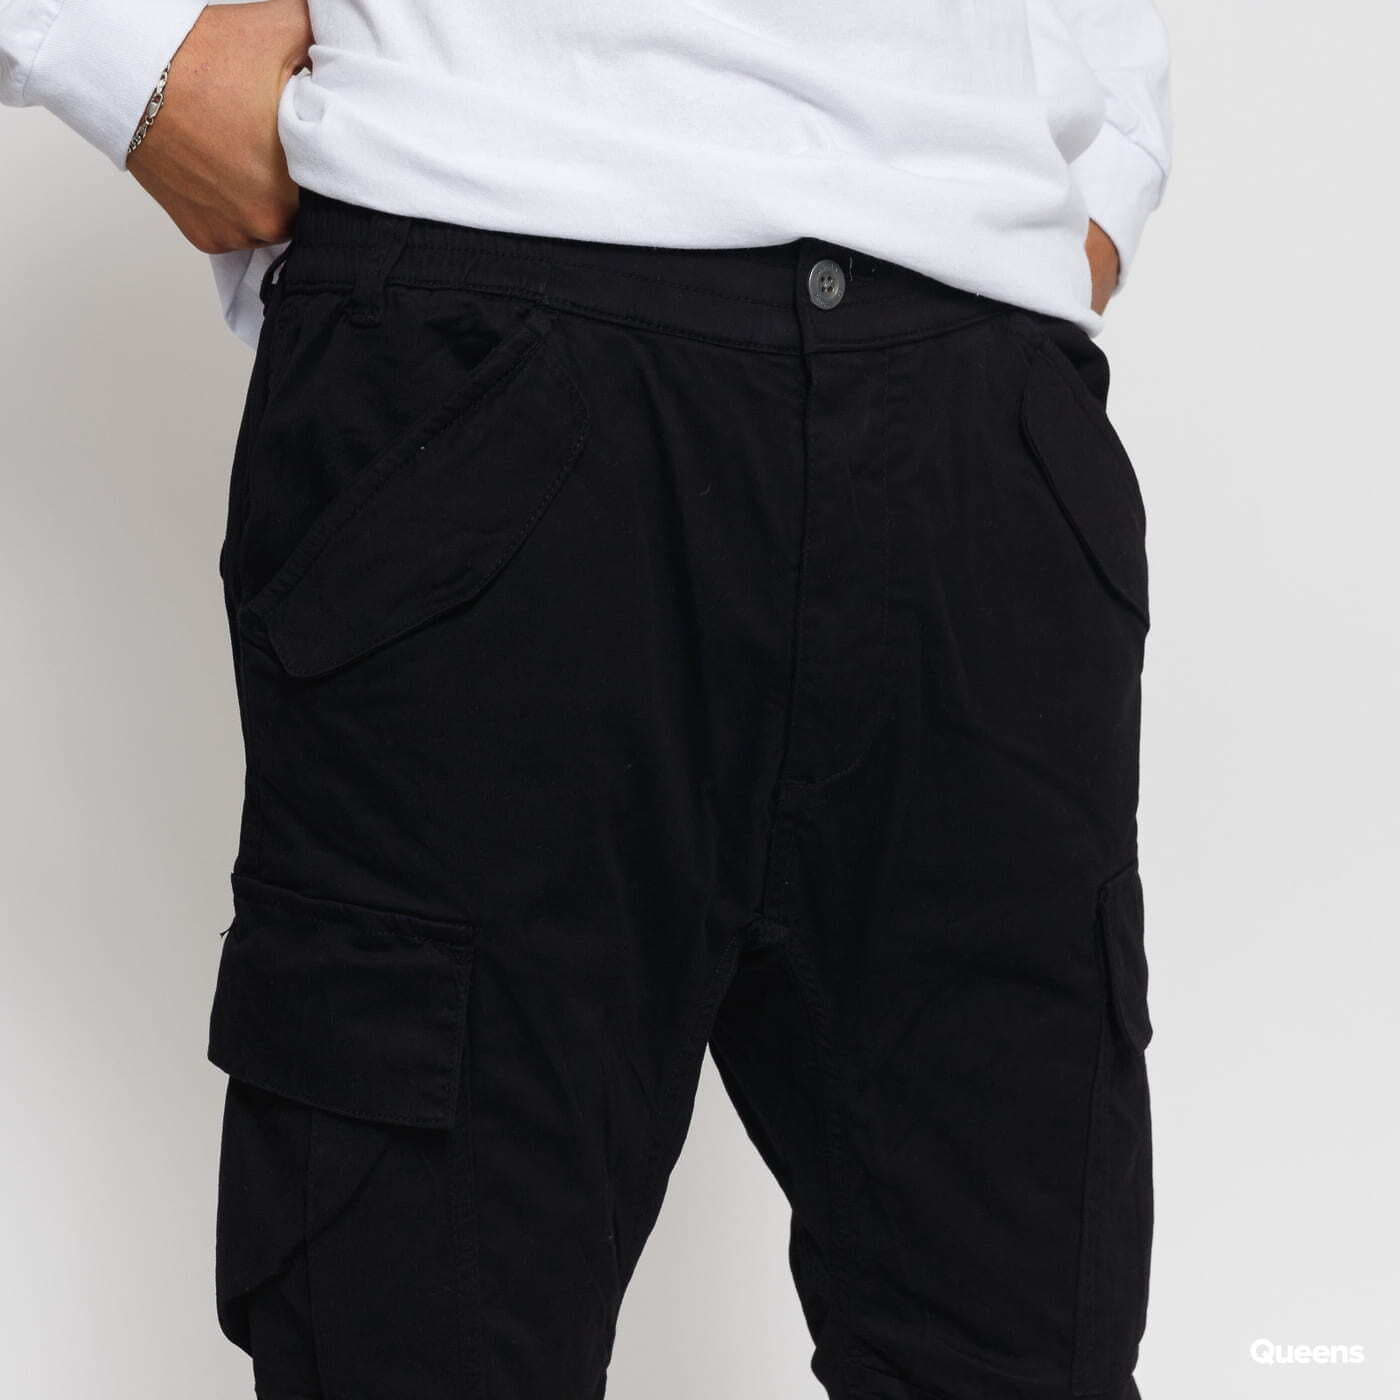 Pants and Pant Alpha Black Airman Industries jeans | Queens